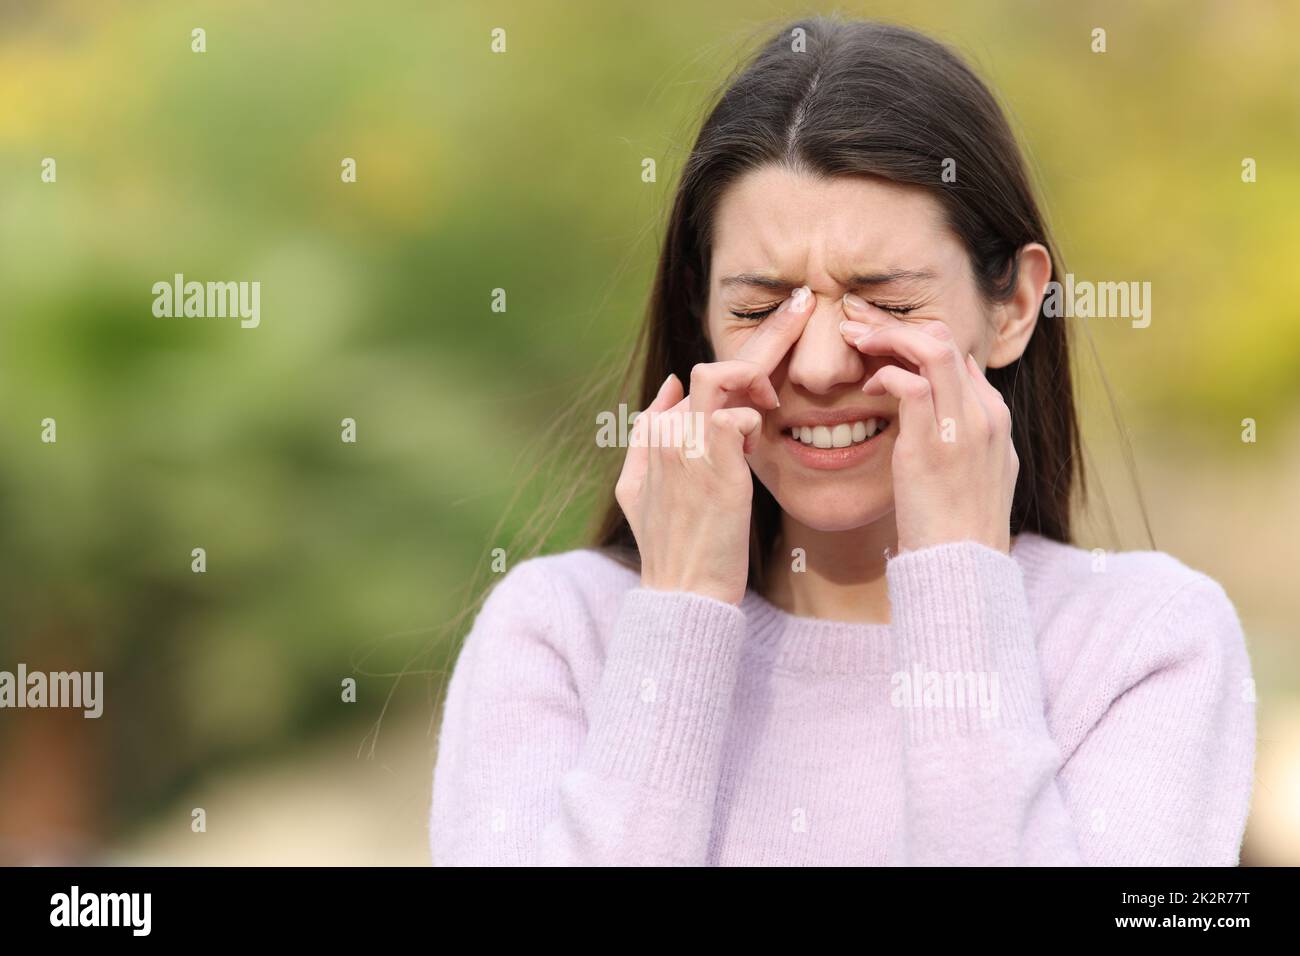 Teen scratching itchy eyes complaining outdoors Stock Photo